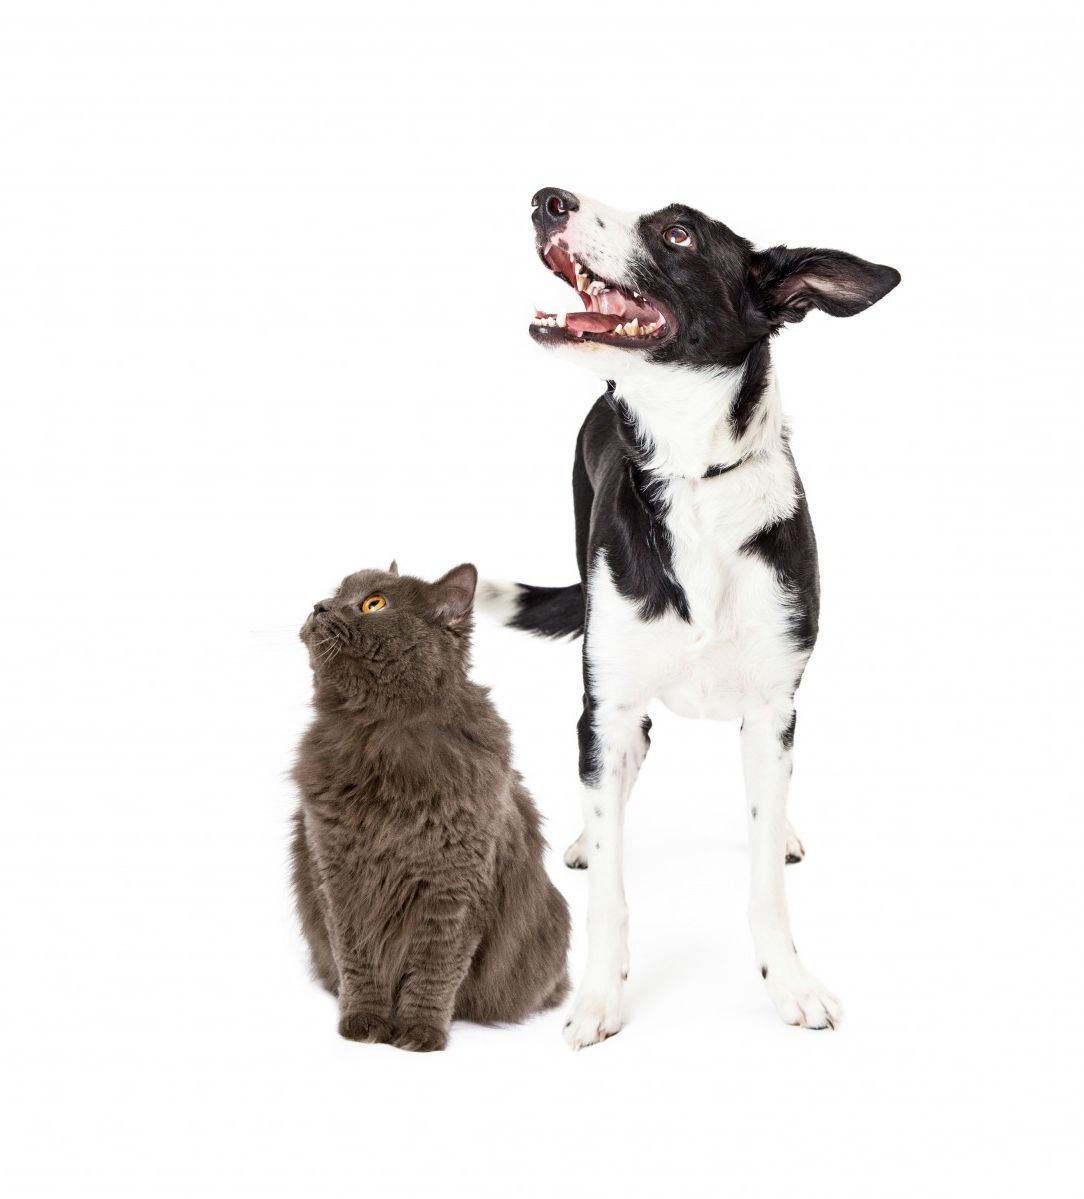 Cat and Dog on White background